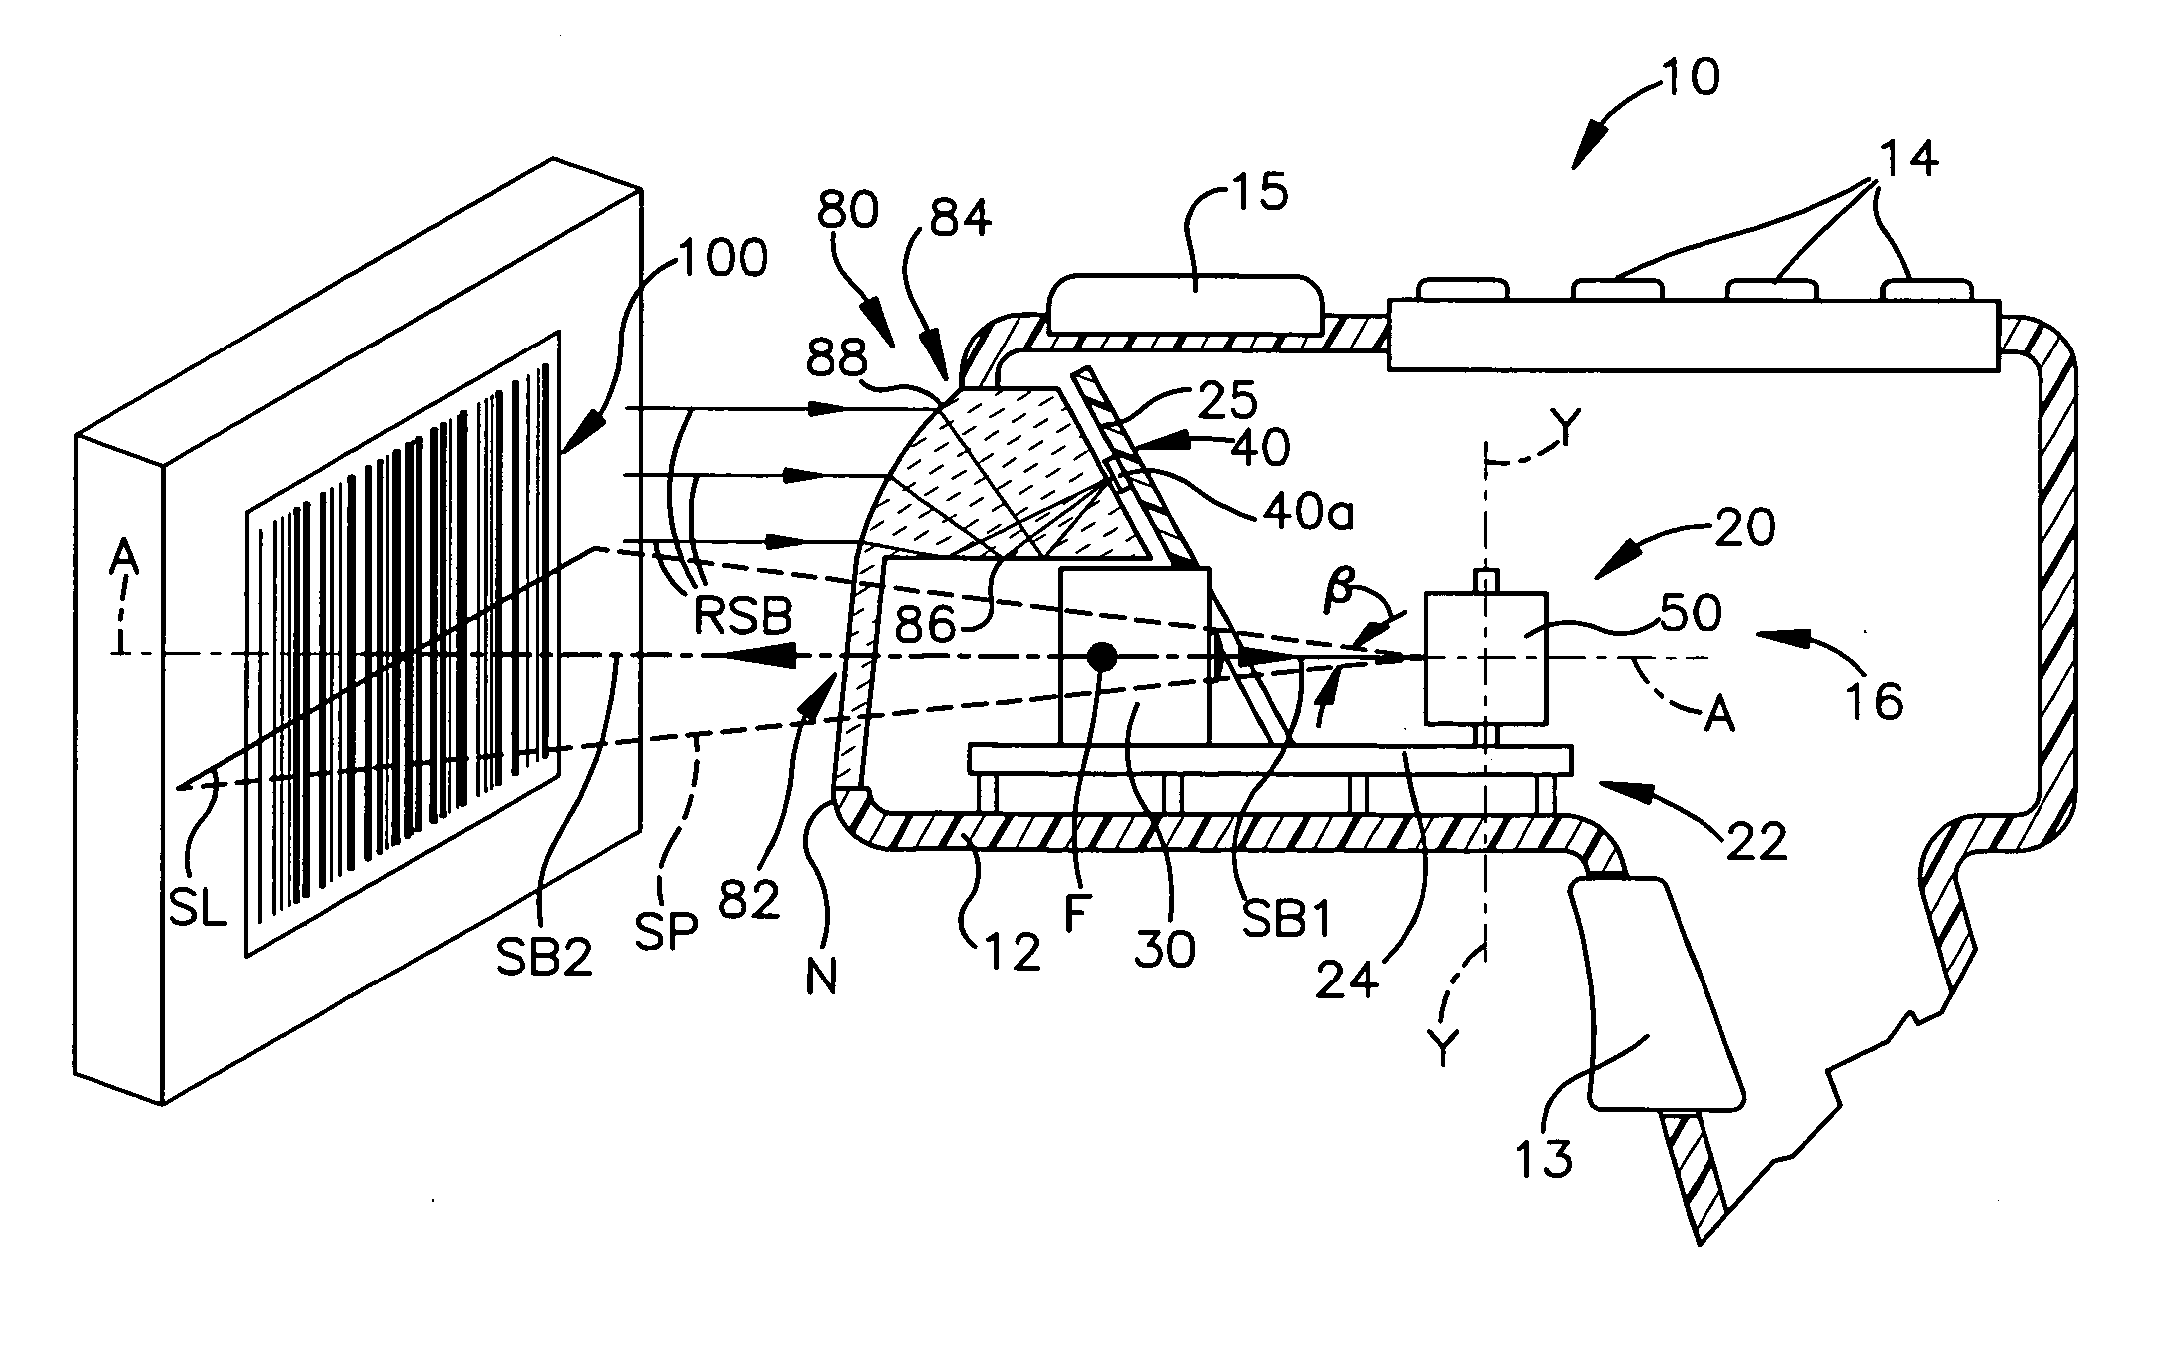 Electro-optical scanner having exit window with light collecting optics